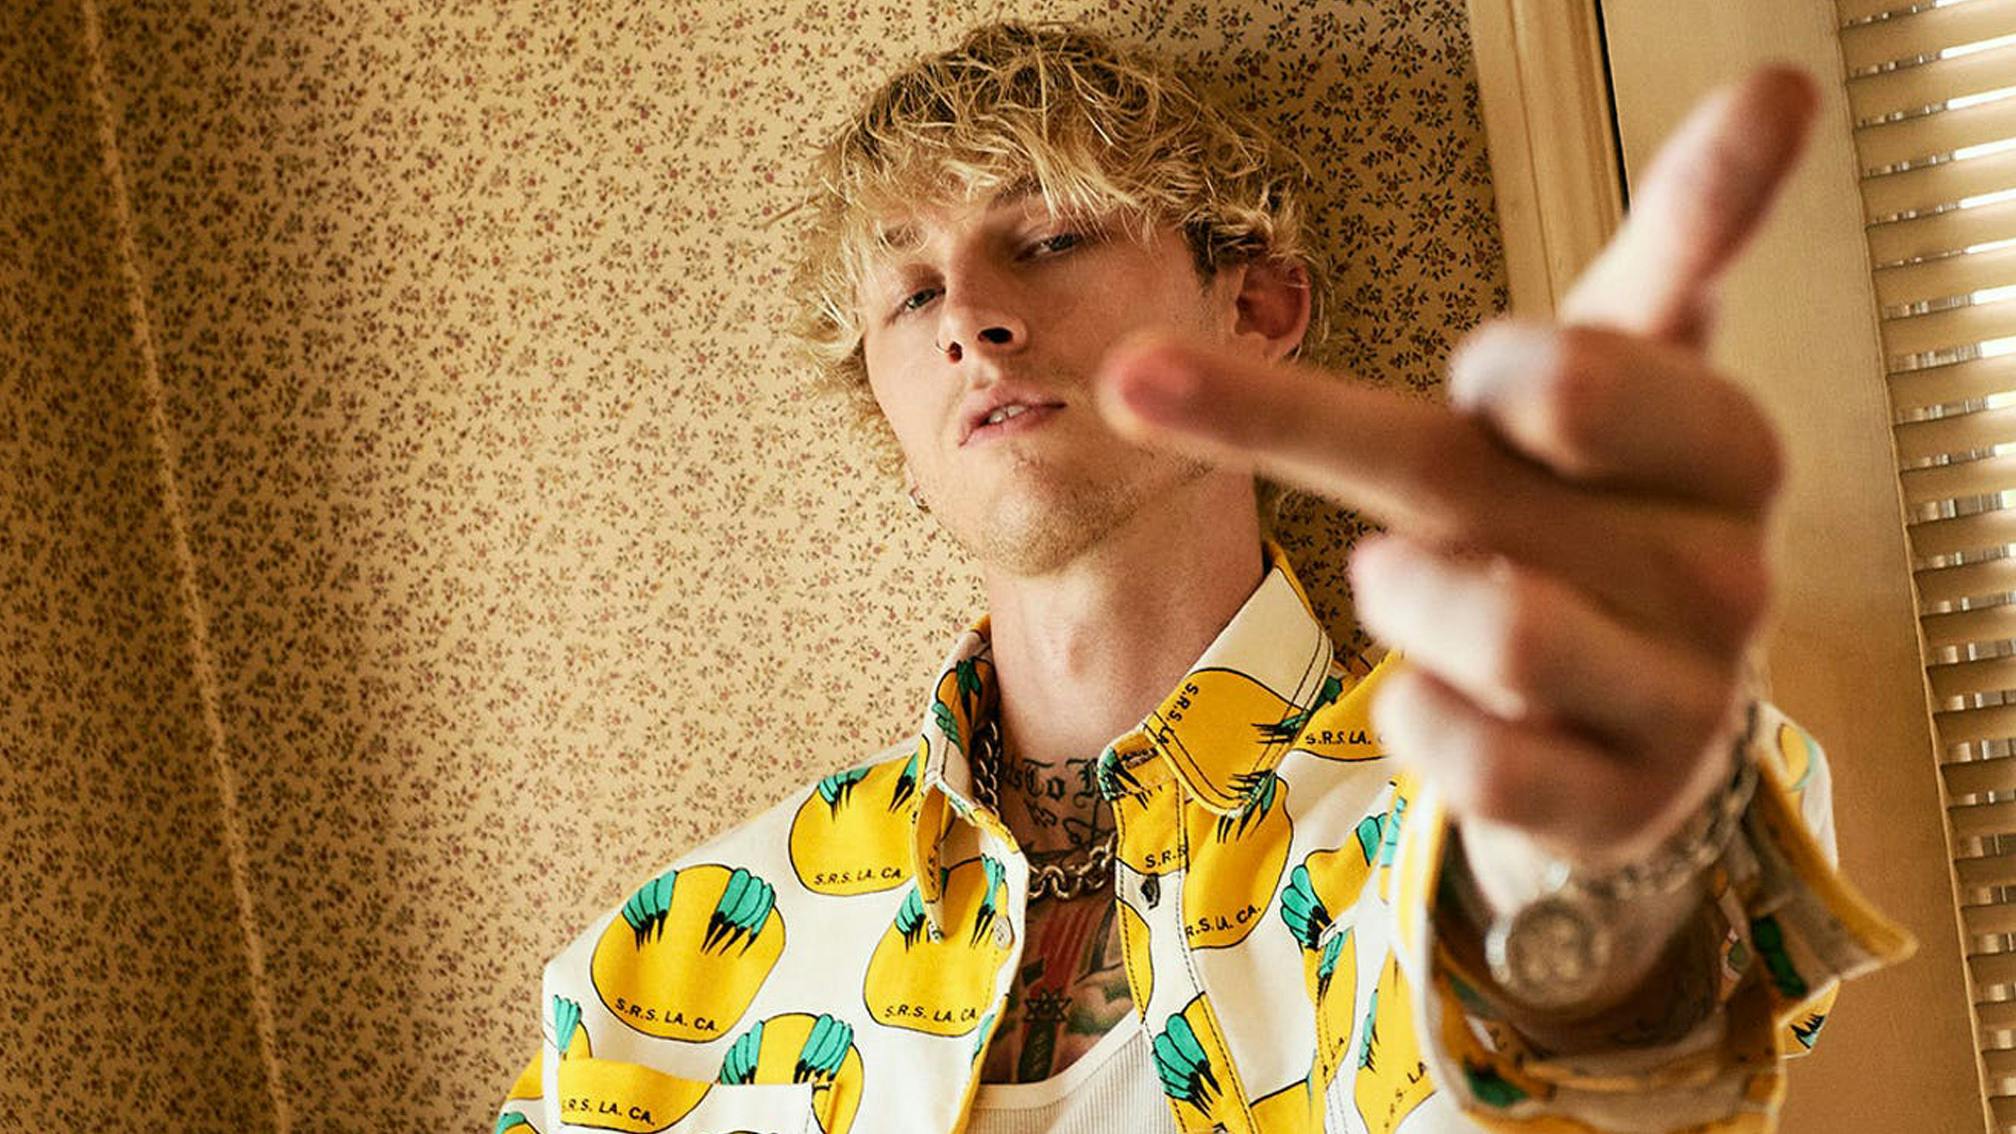 MGK on future intentions: “Break the mould of everything I just did… and piss people off all over again!”